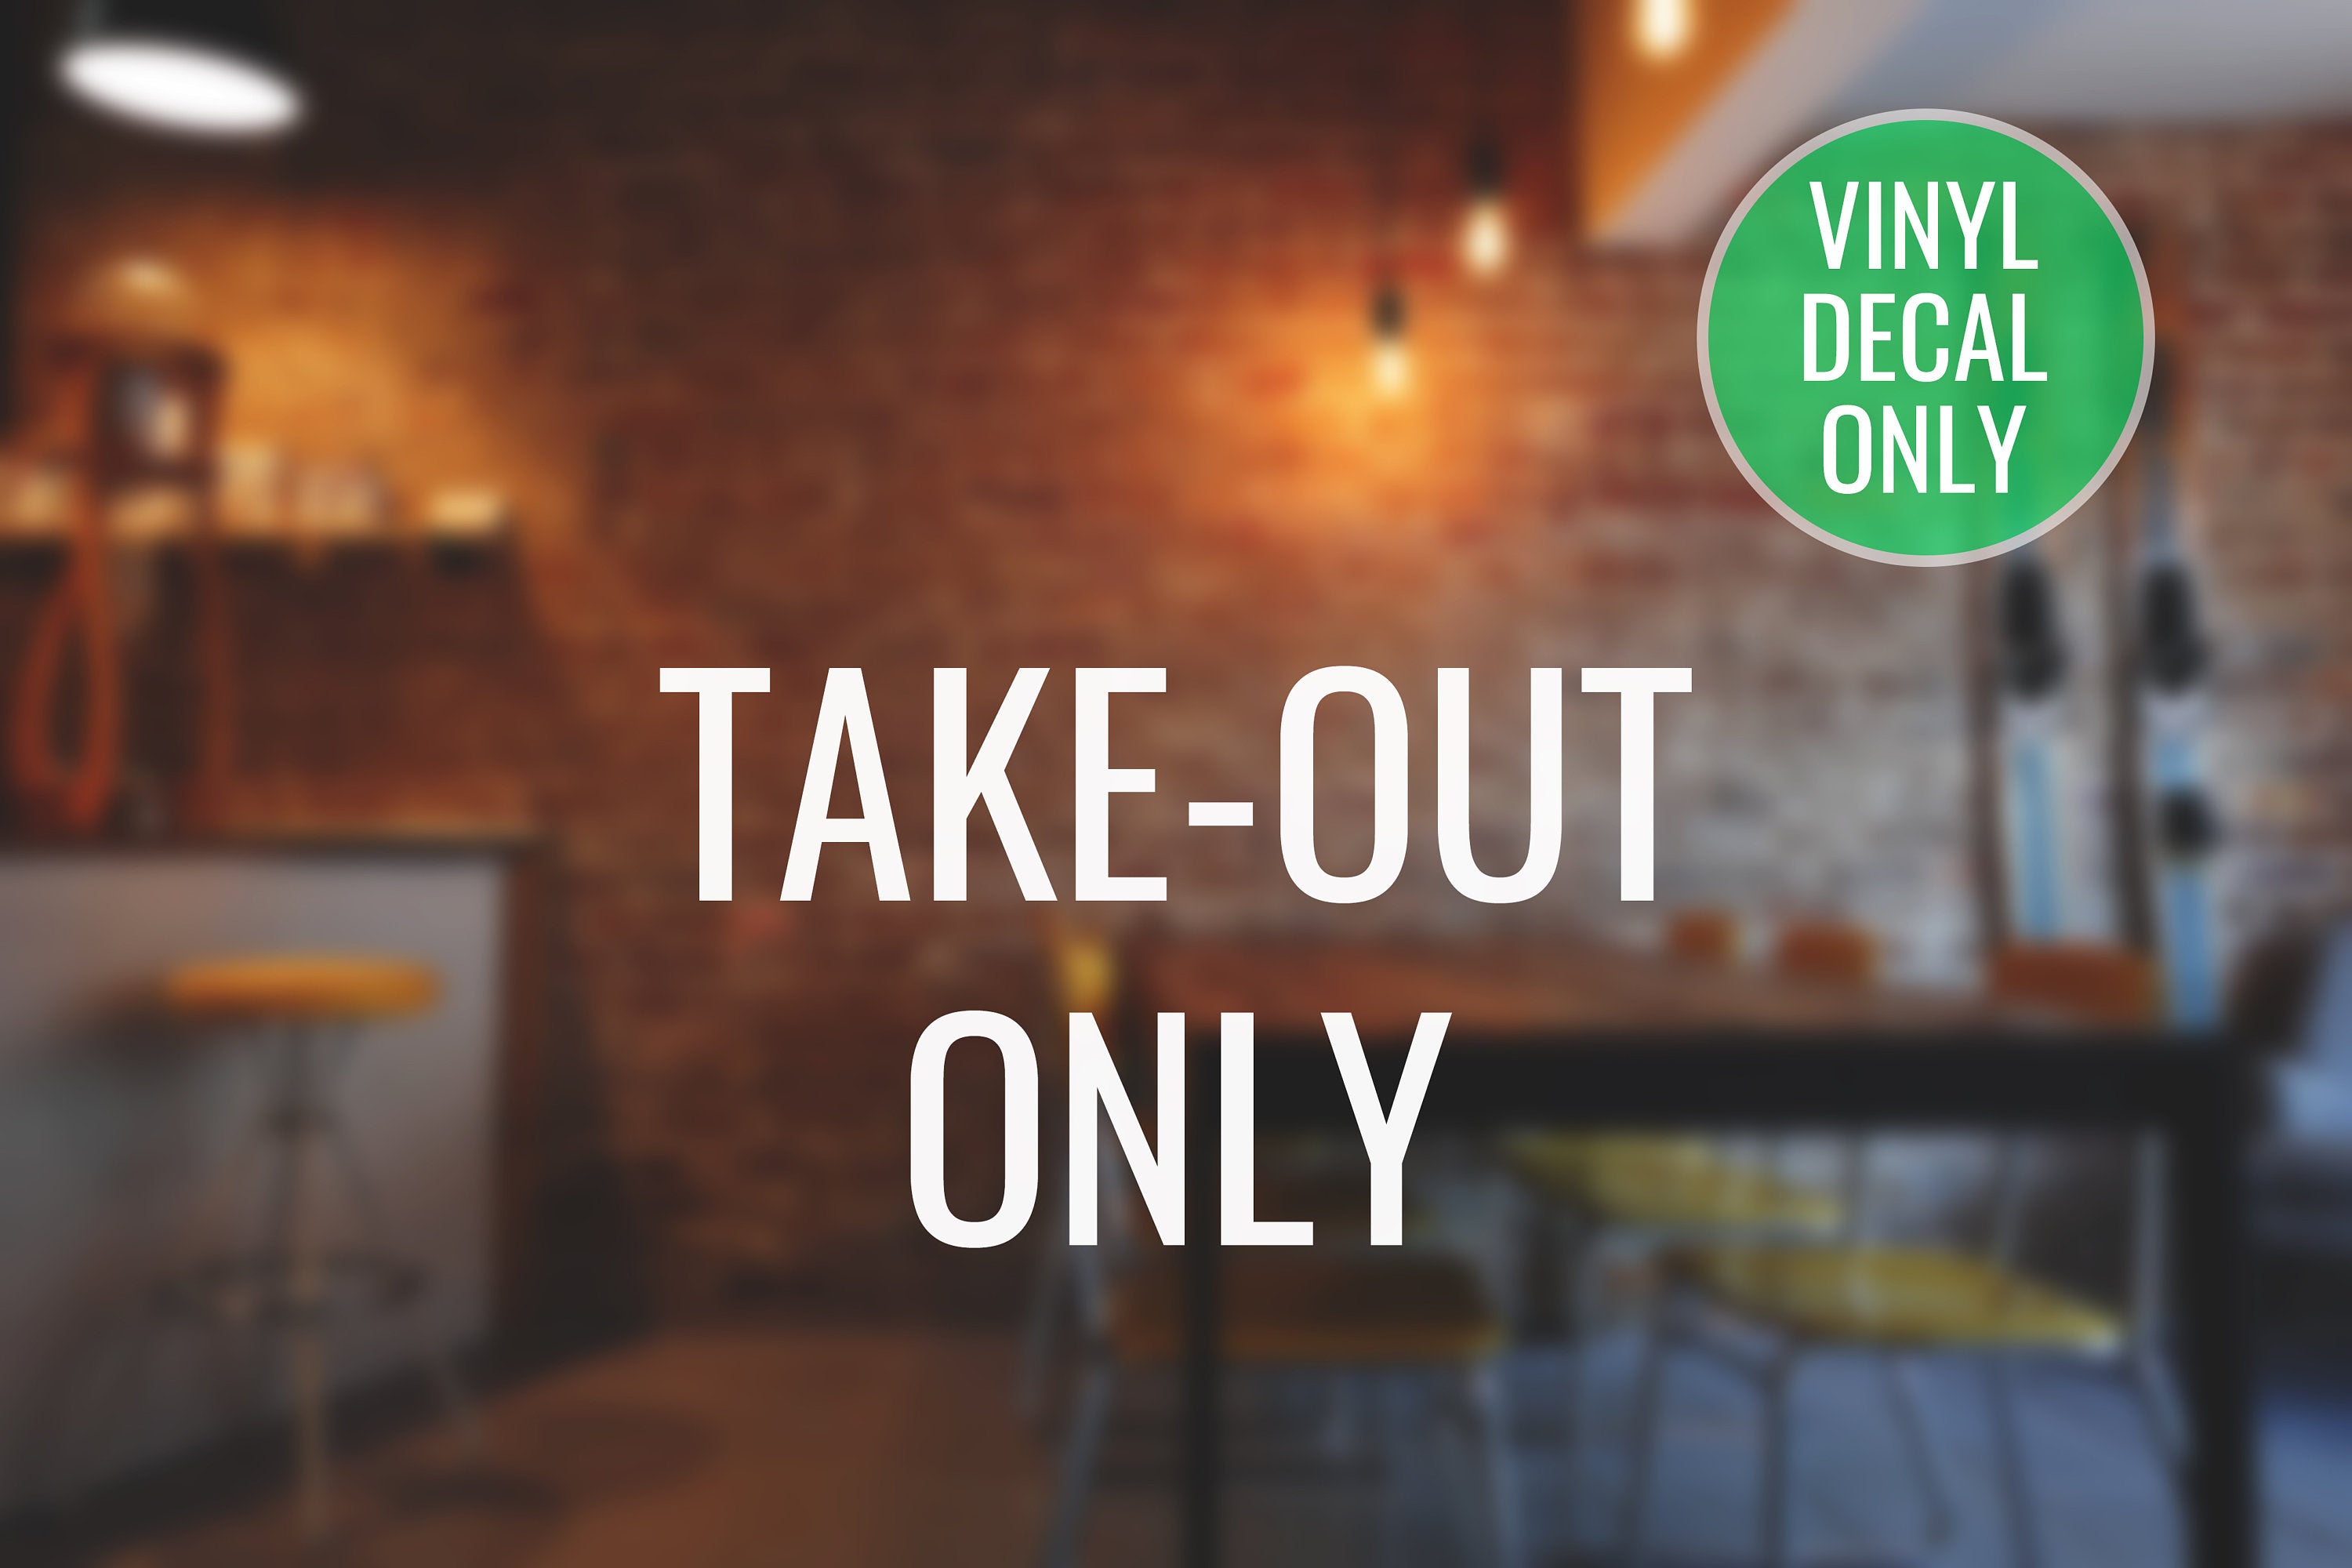 Take-out Only Decal - Vinyl Decal for Fast food, Cafe, Coffee Bars, Coffee Shops, Bistros, Eatery, Cafeteria, Food Truck, Restaurants!